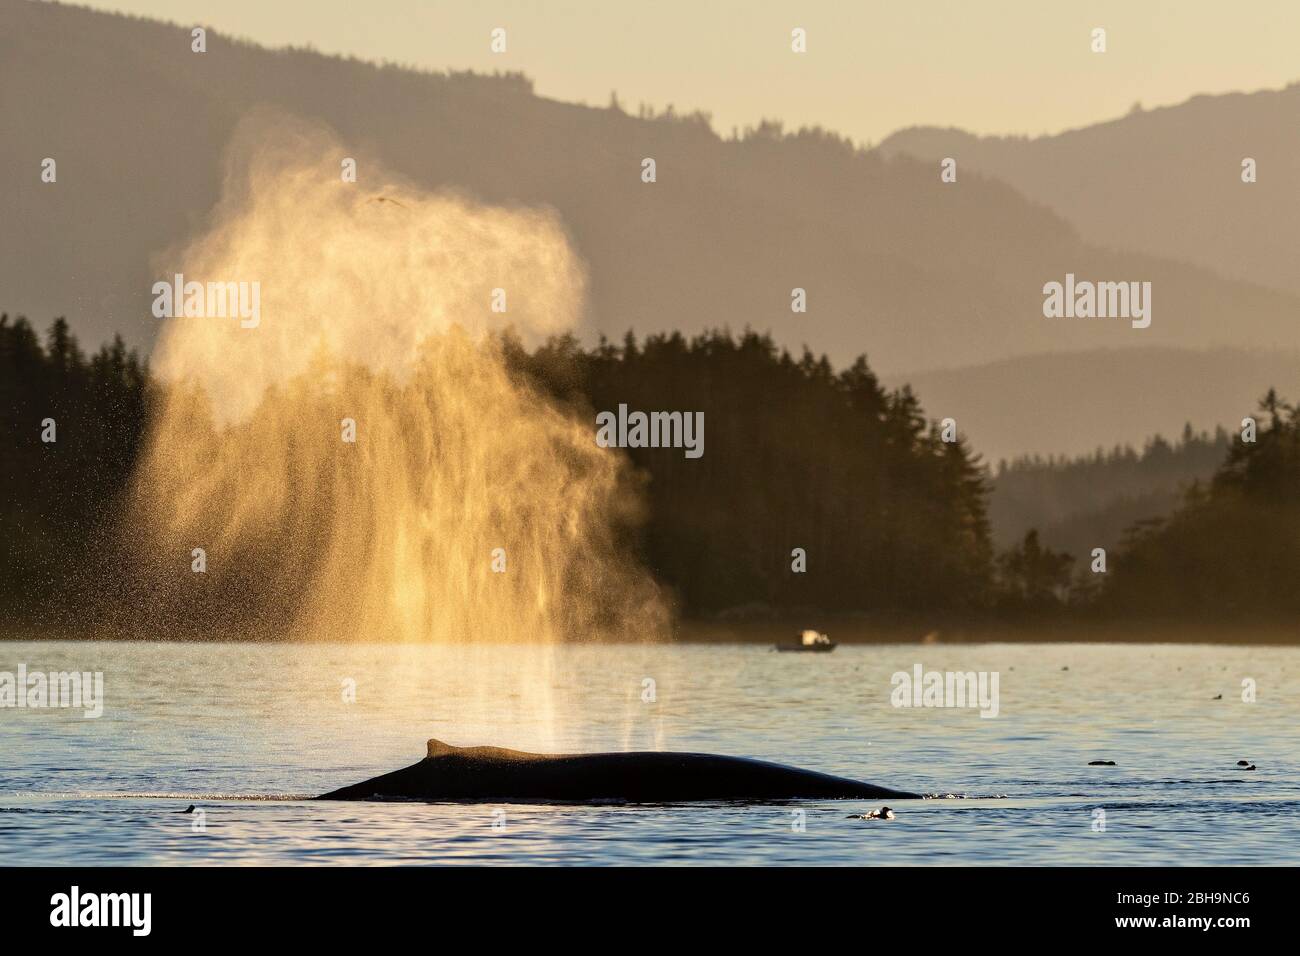 Humpback whale swims just before sunset along the Broughton Archipelago, First Nations Territory, British Columbia, Canada Stock Photo